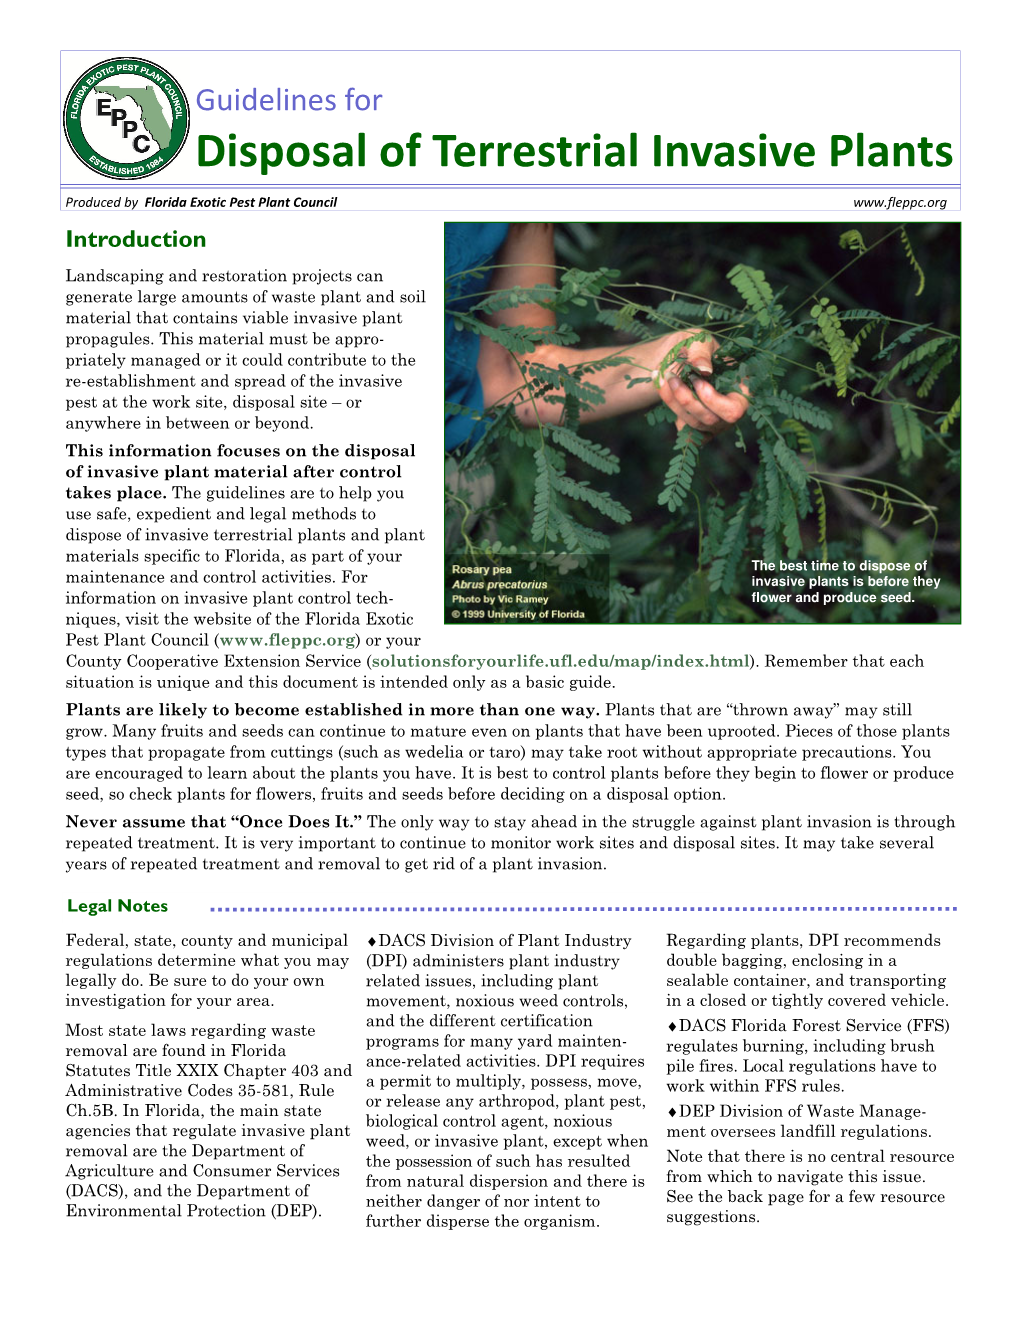 Guidelines for Disposal of Terrestrial Invasive Plants